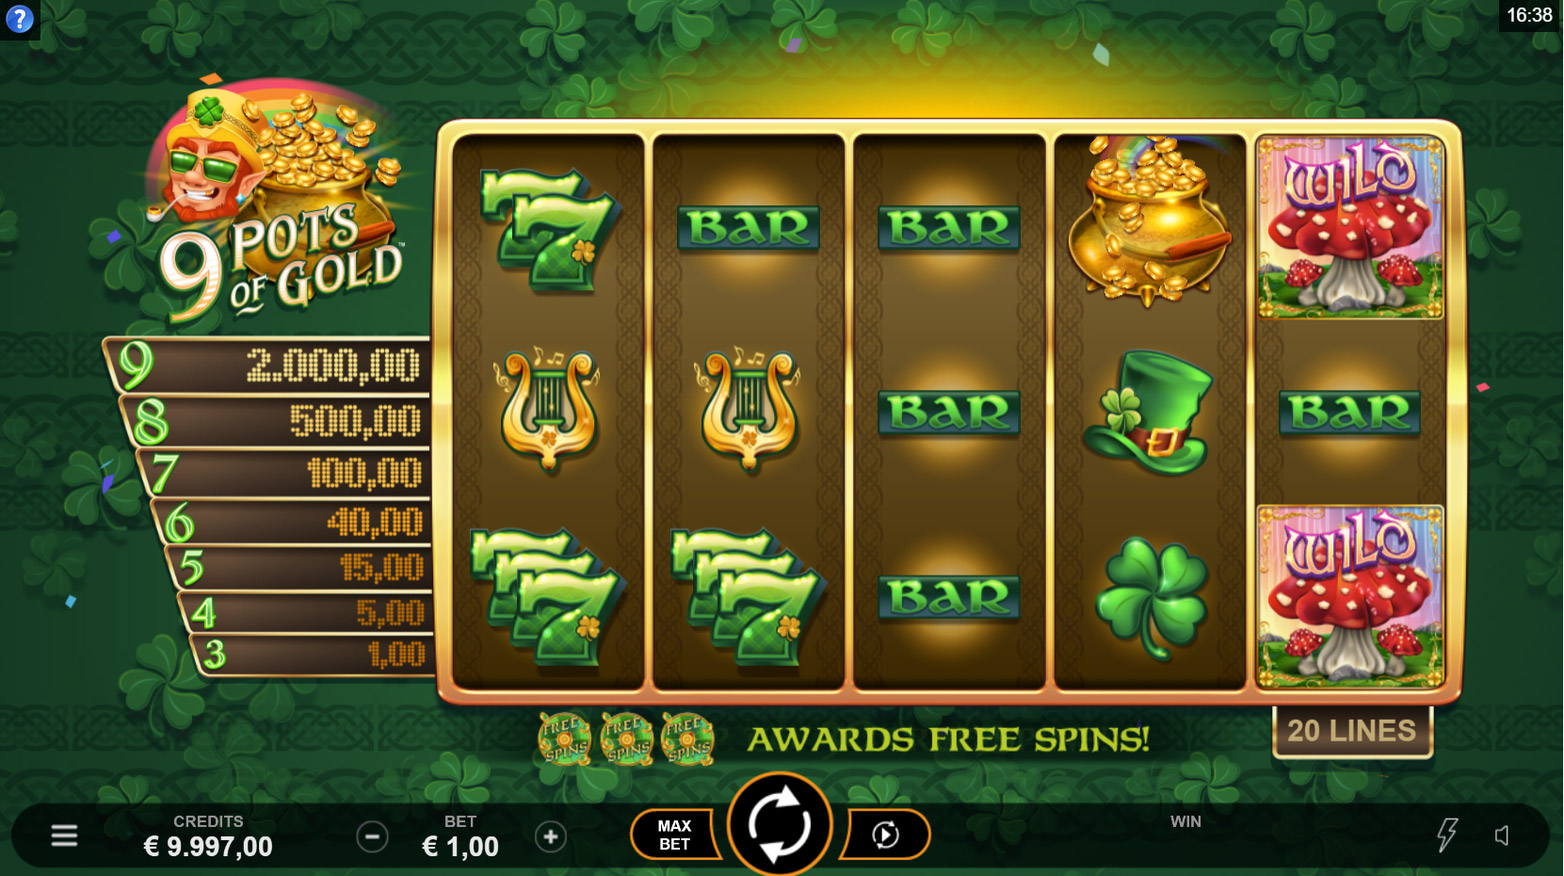 Gameburger’s 9 Pots of Gold slot game in action